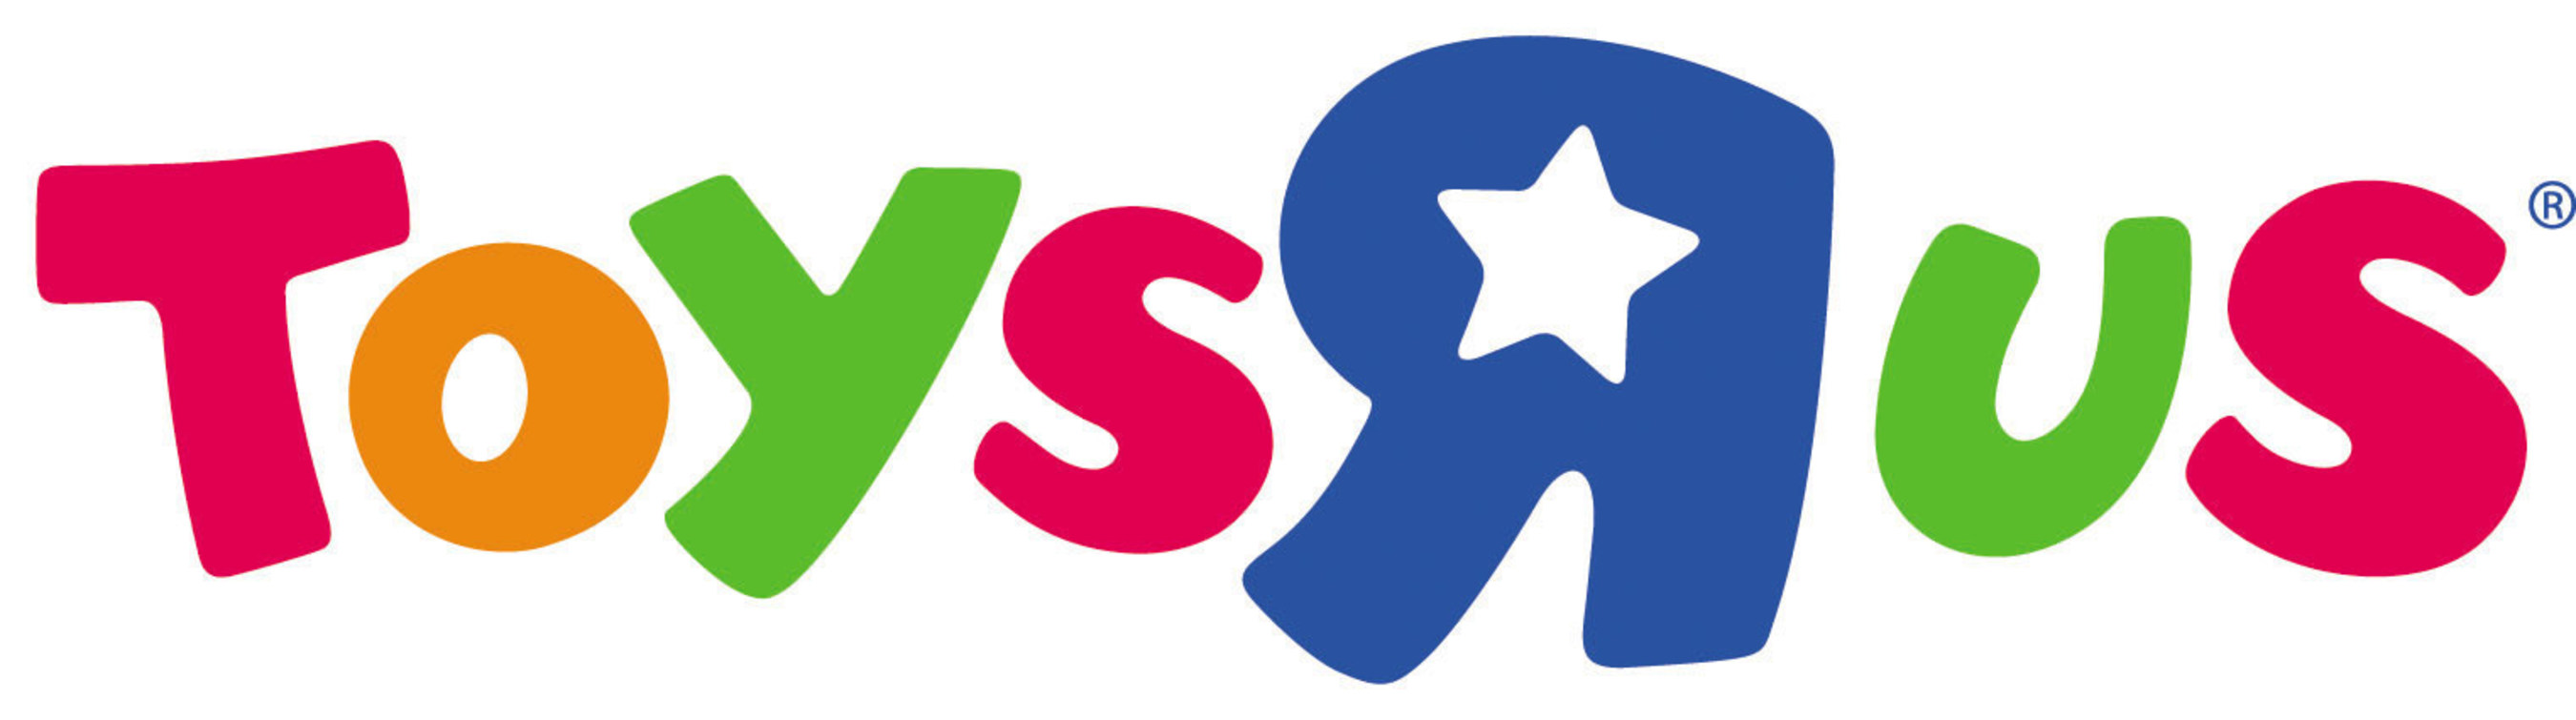 toys r us top toys